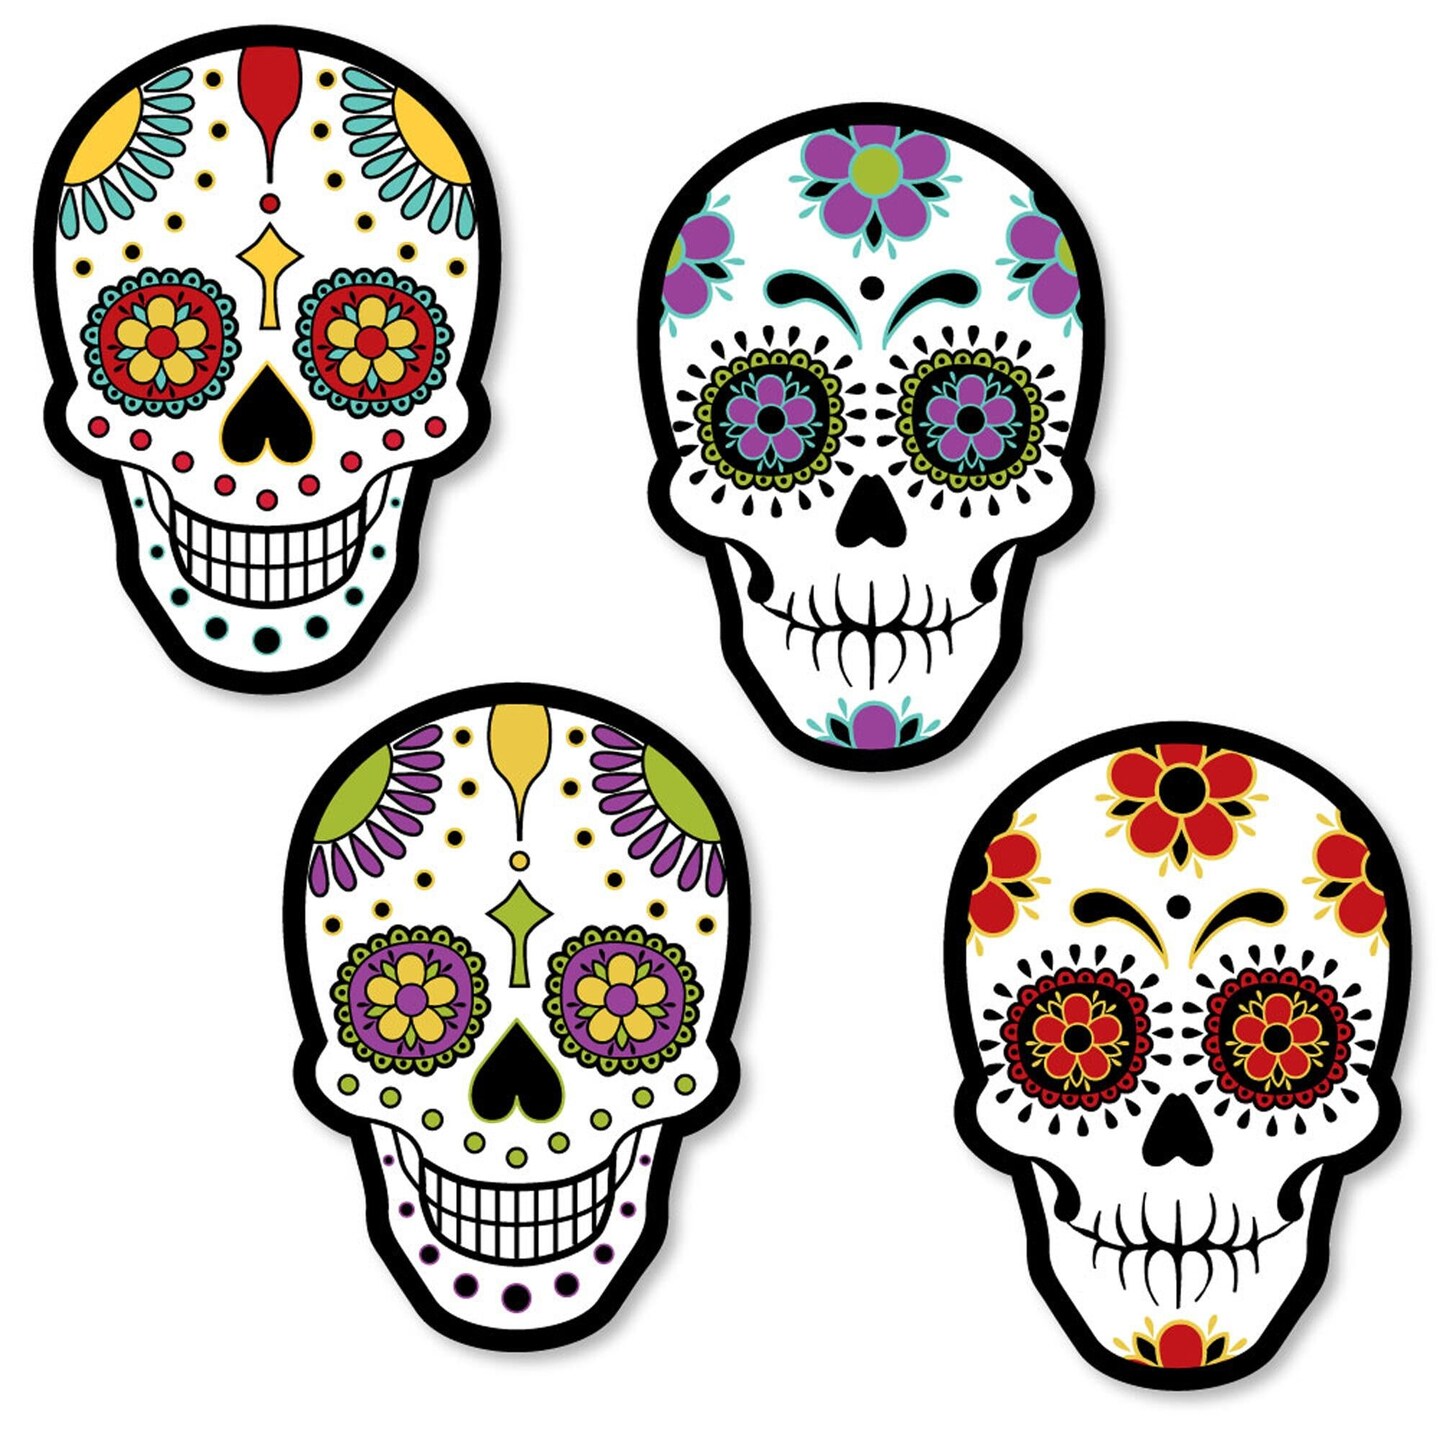 Big Dot of Happiness Day of the Dead - DIY Shaped Sugar Skull Party Cut-Outs - 24 Count